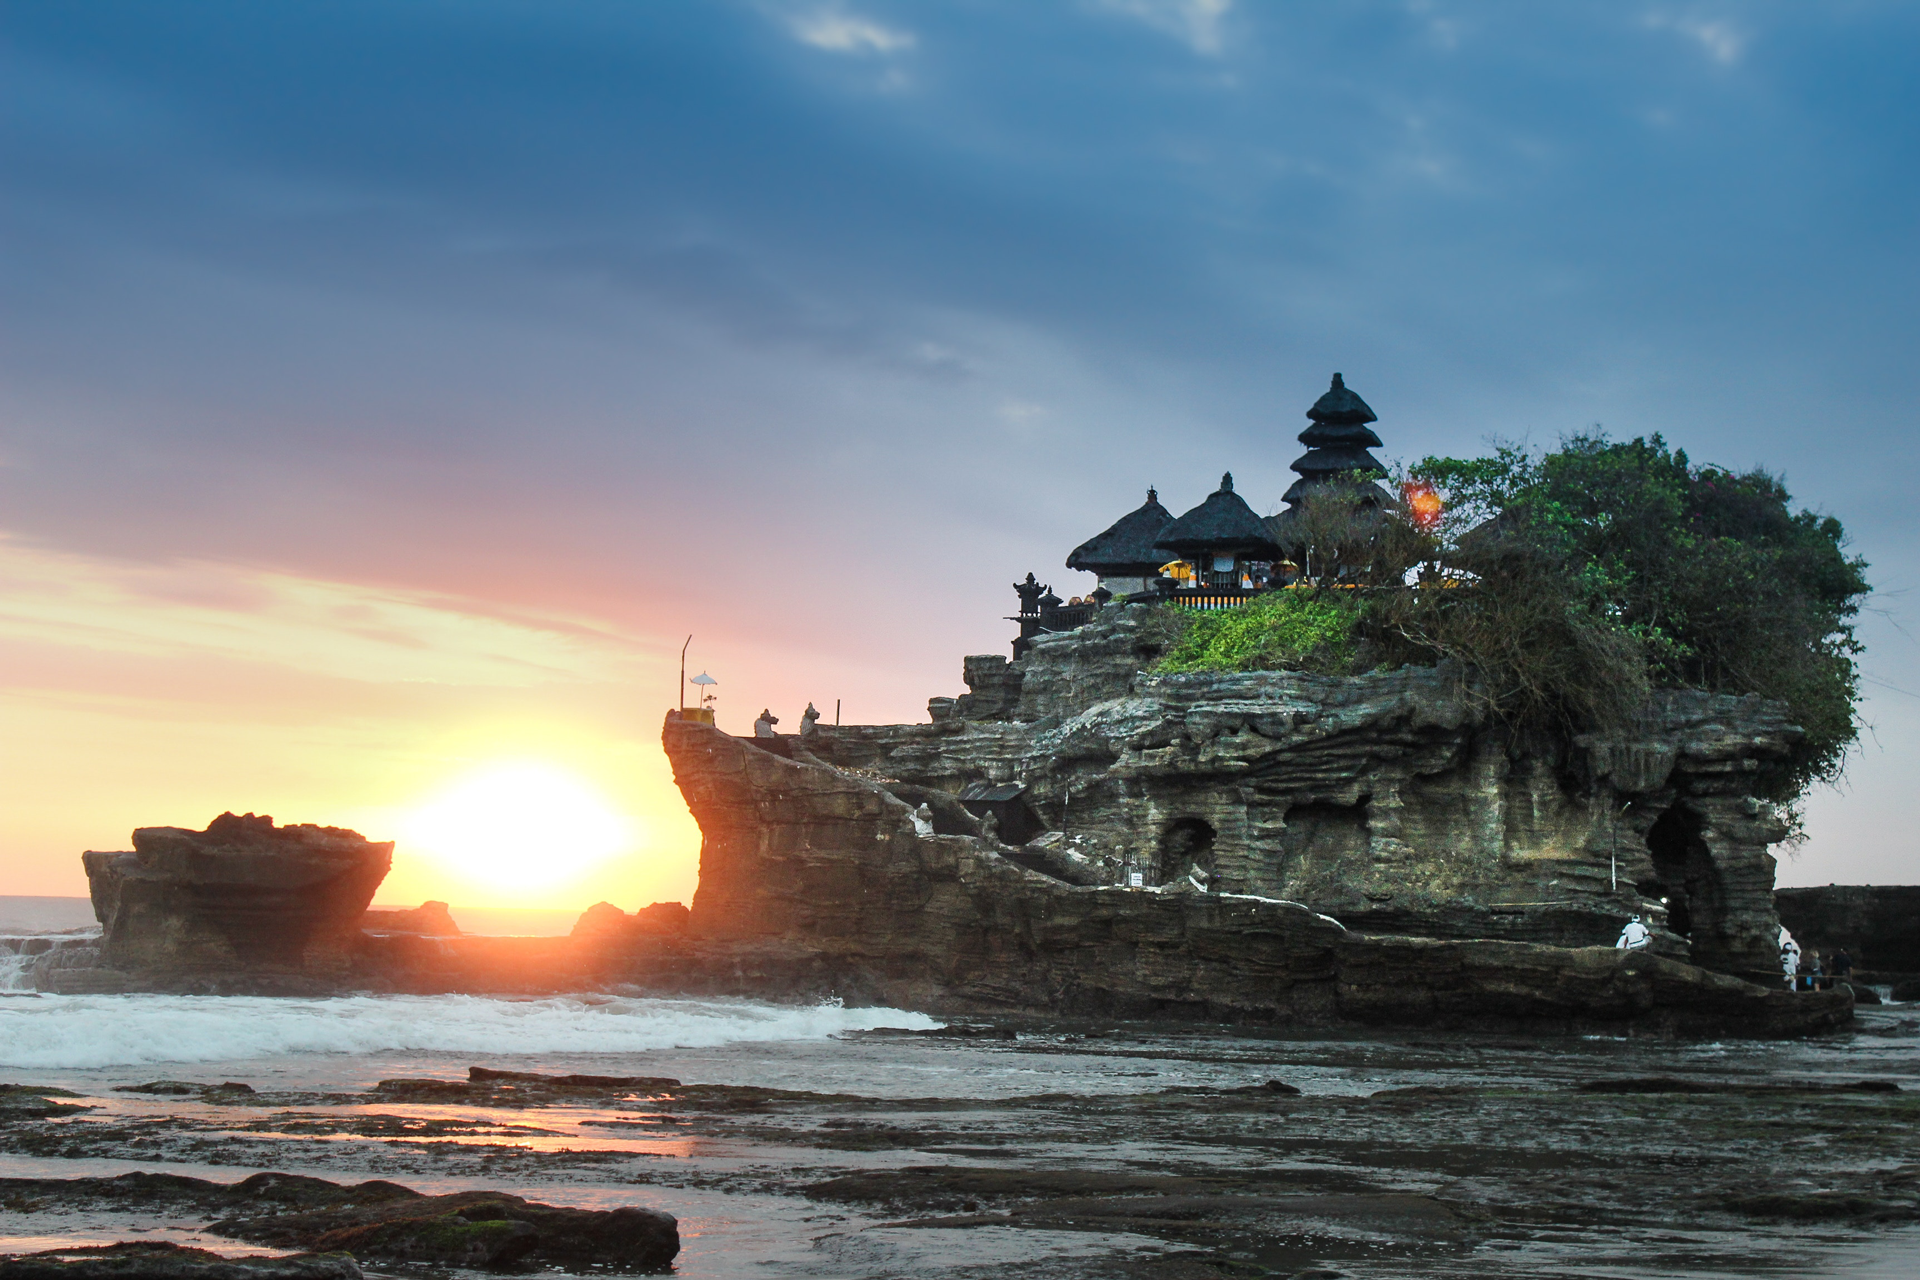 Balinese temple on a rock in the sea. 